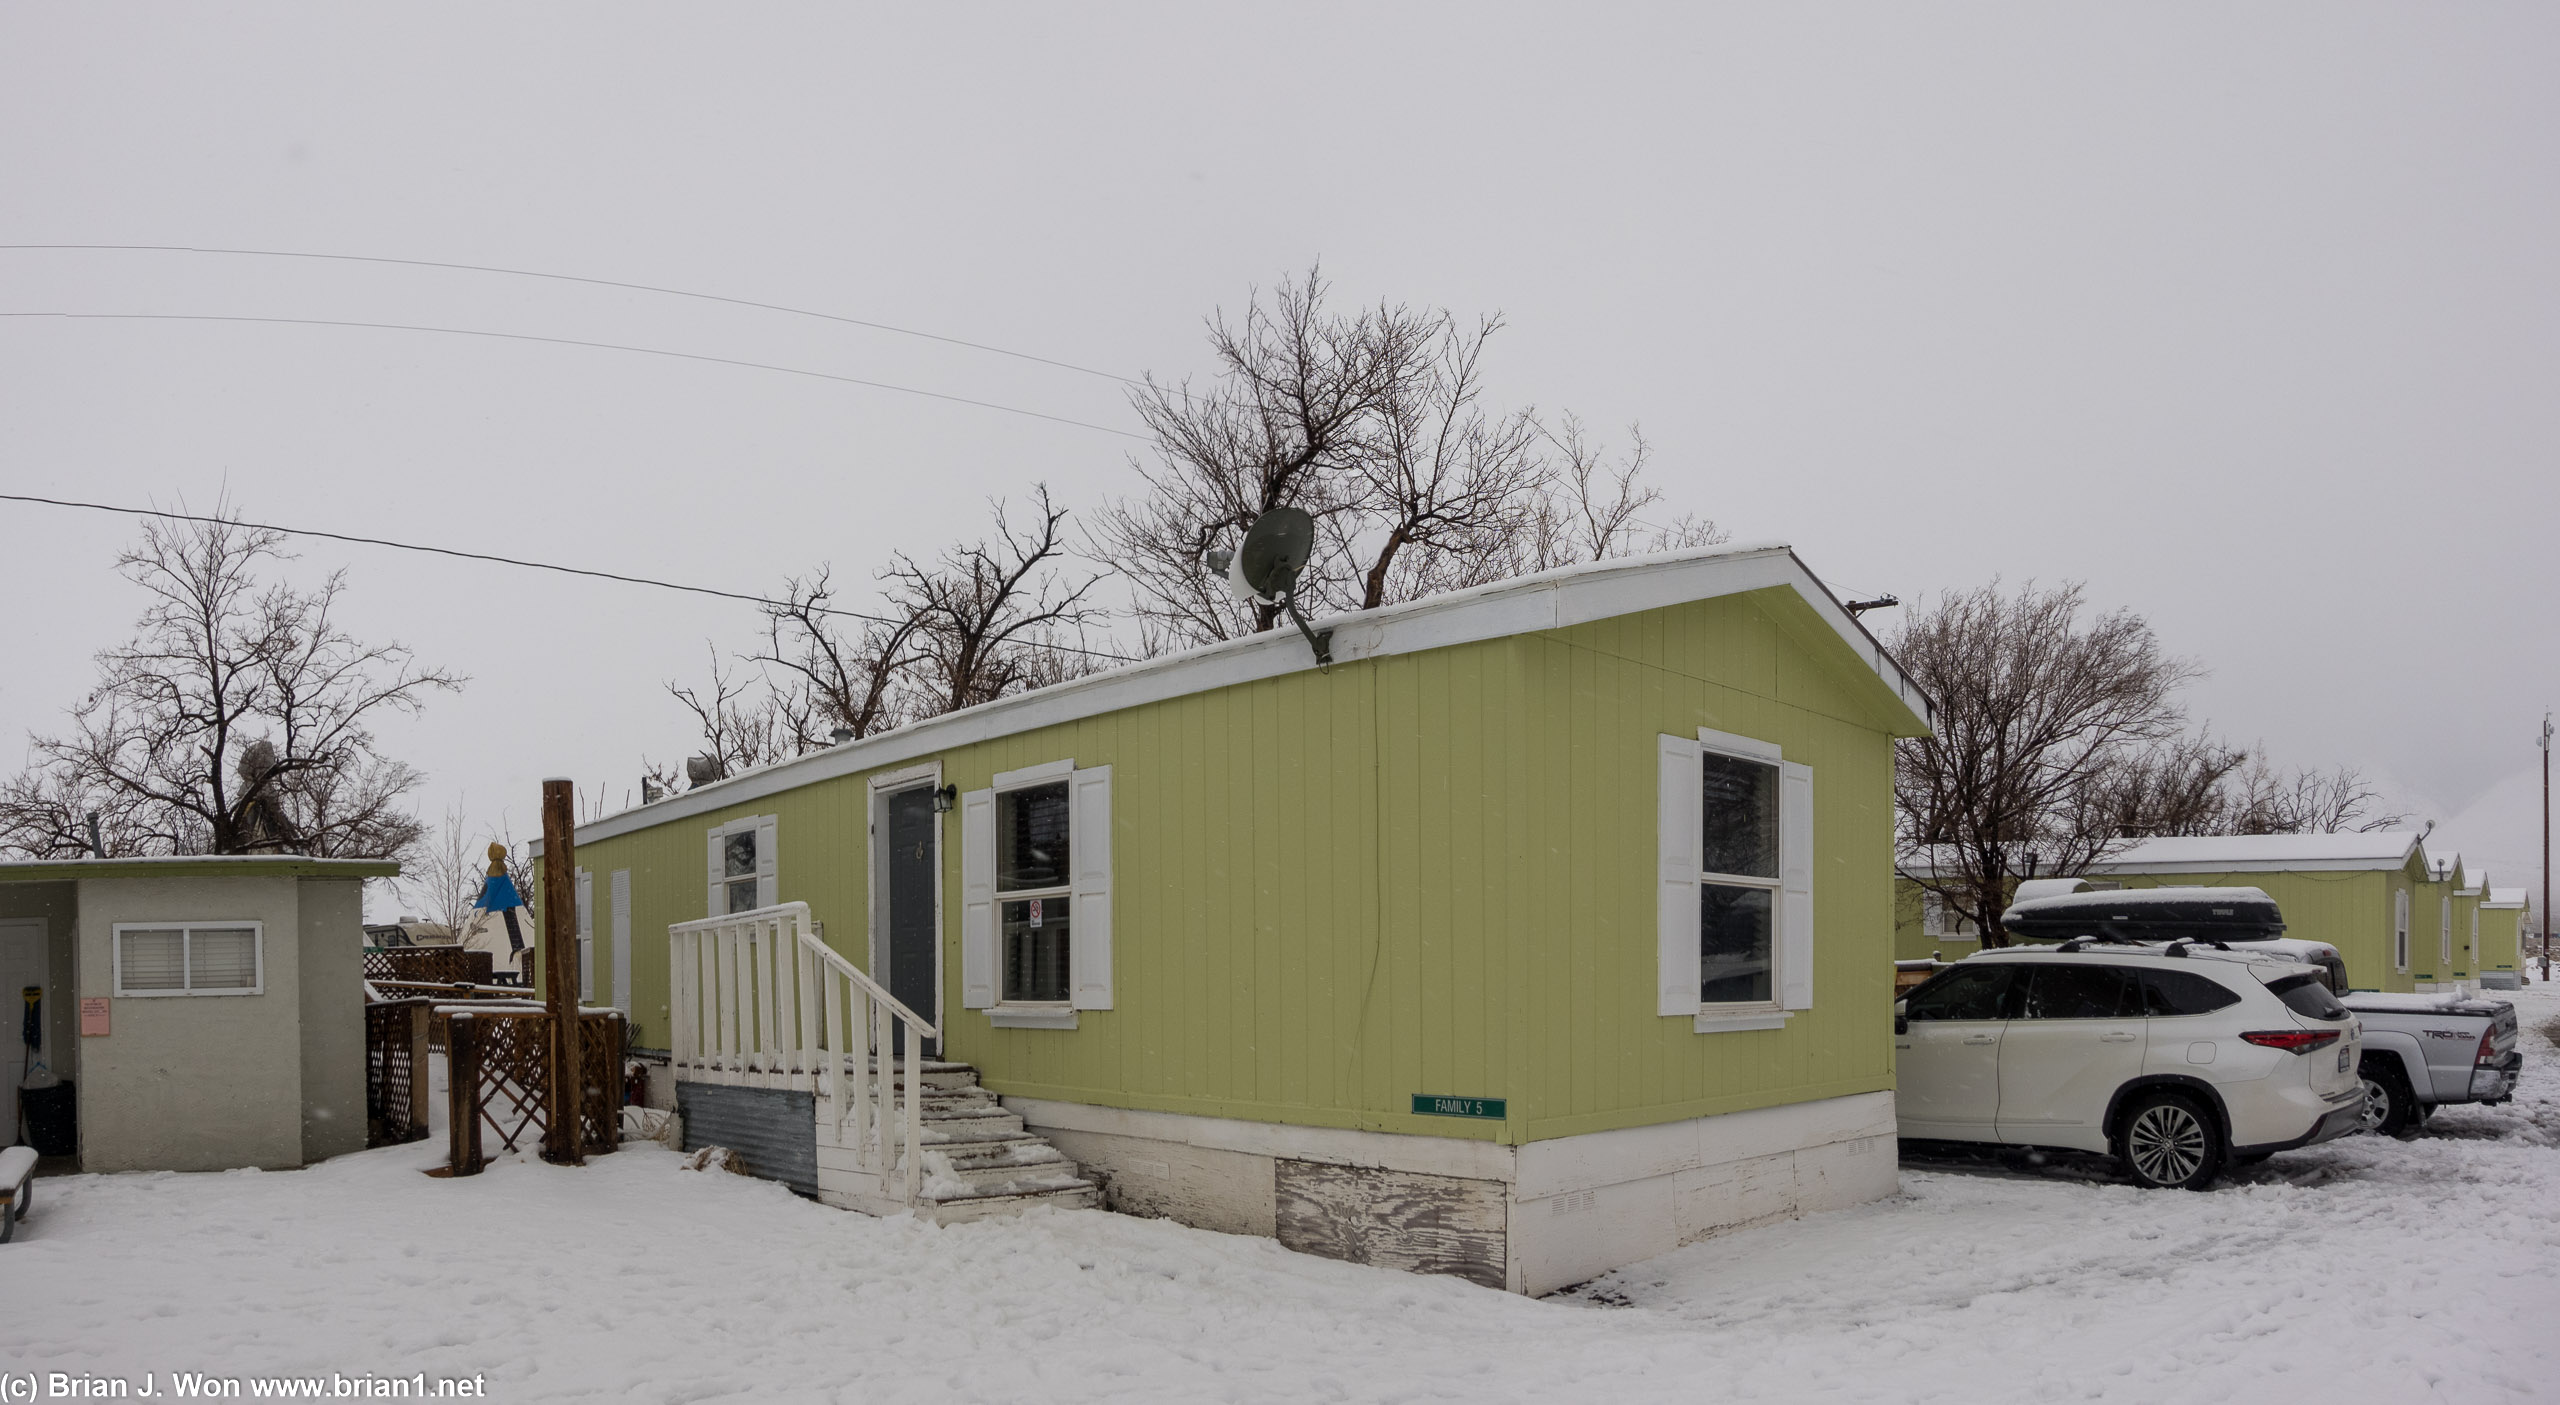 Trailer homes for the "family" rooms.